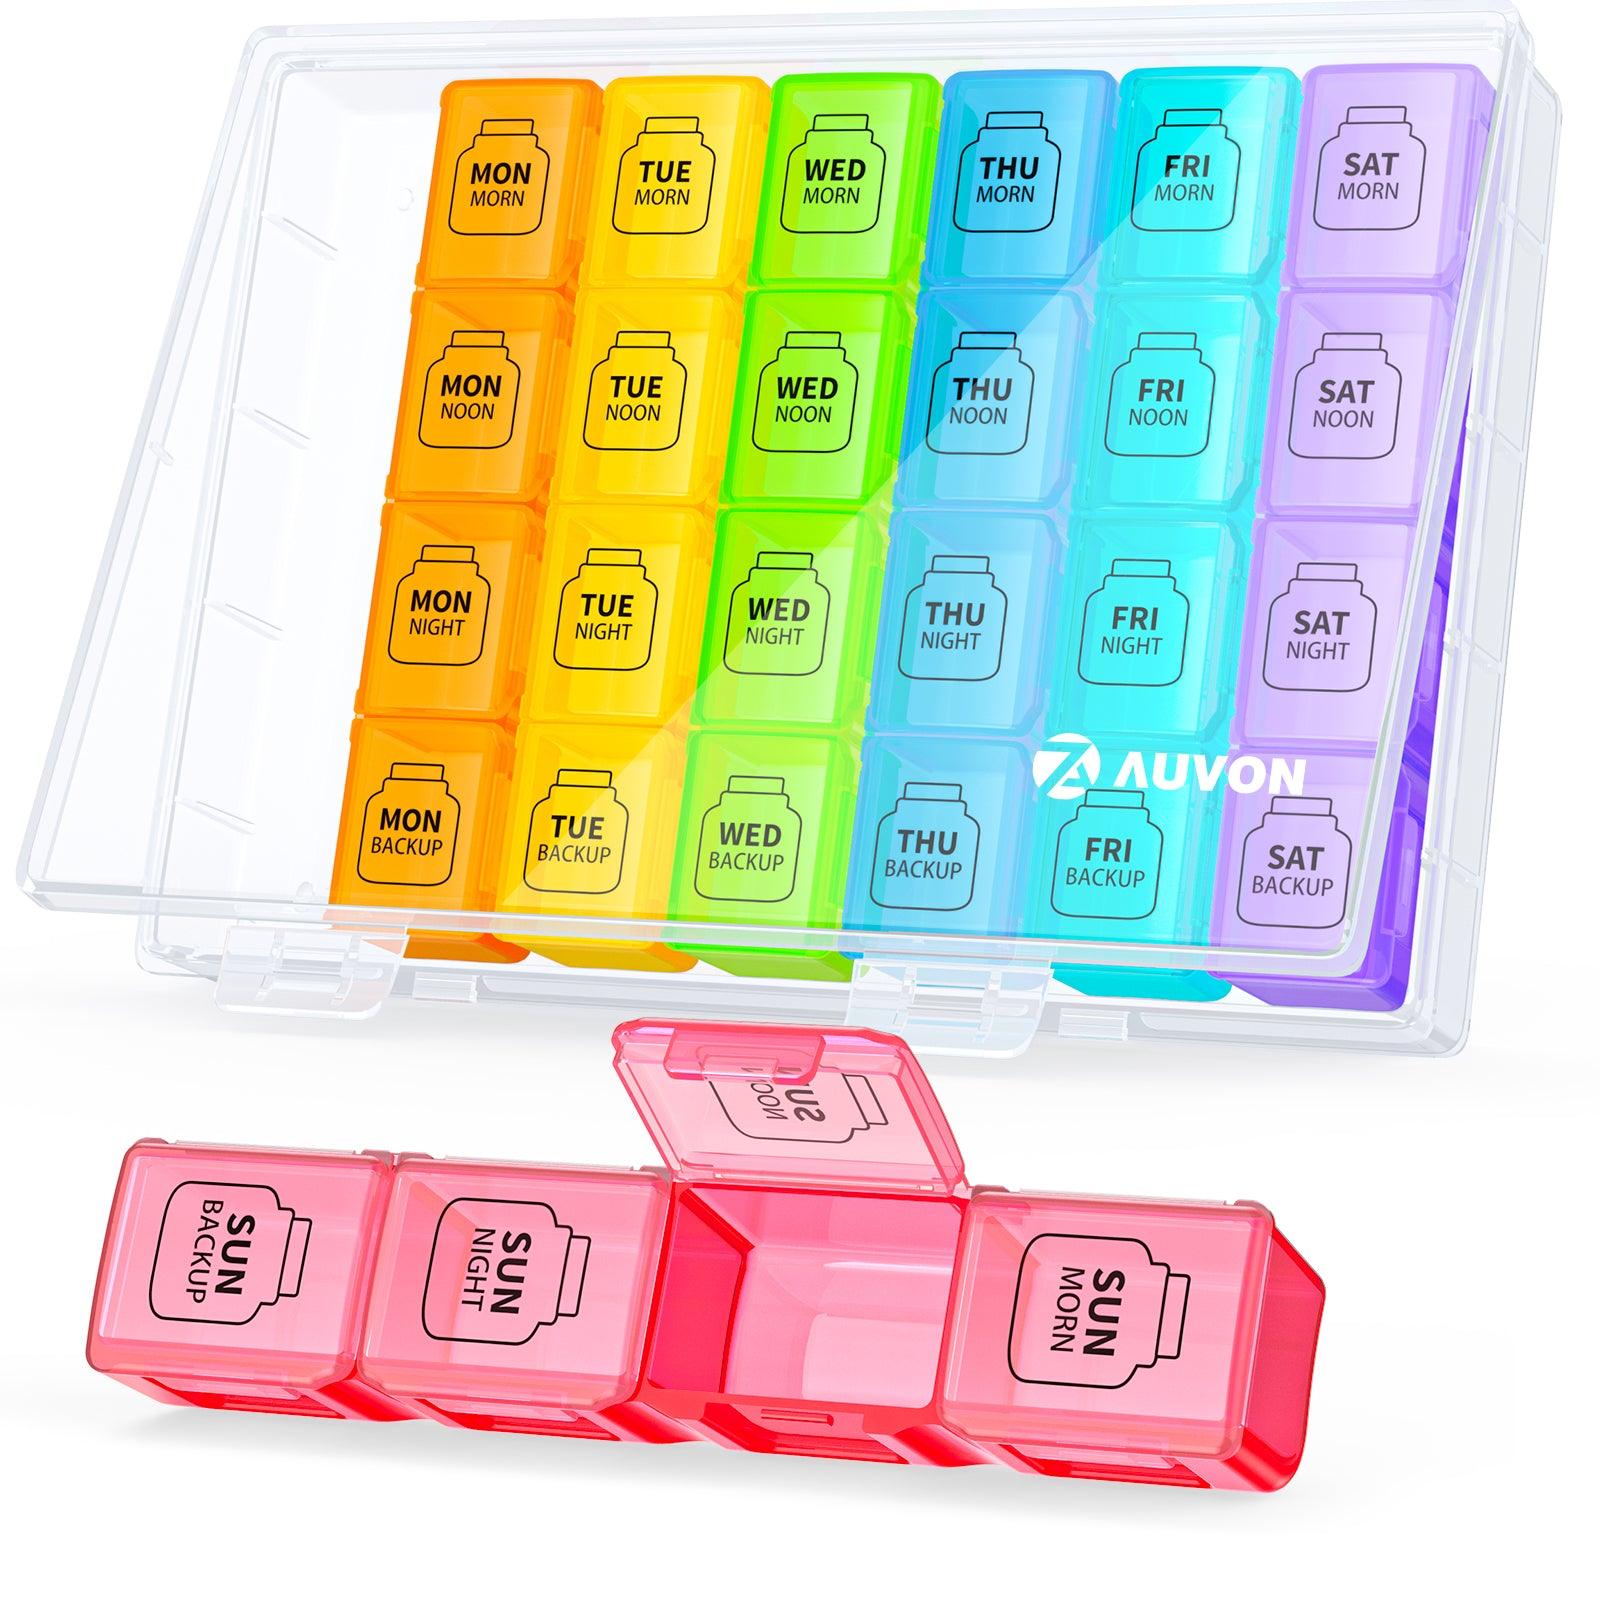 AUVON Extra Large Weekly Pill Organizer 4 Times a Day, 7 Day Pill Box, Daily Pill Case with 28 Compartments, Large Enough to Hold the Large Fish Oils, Vitamins, Supplements and Medication - AUVON